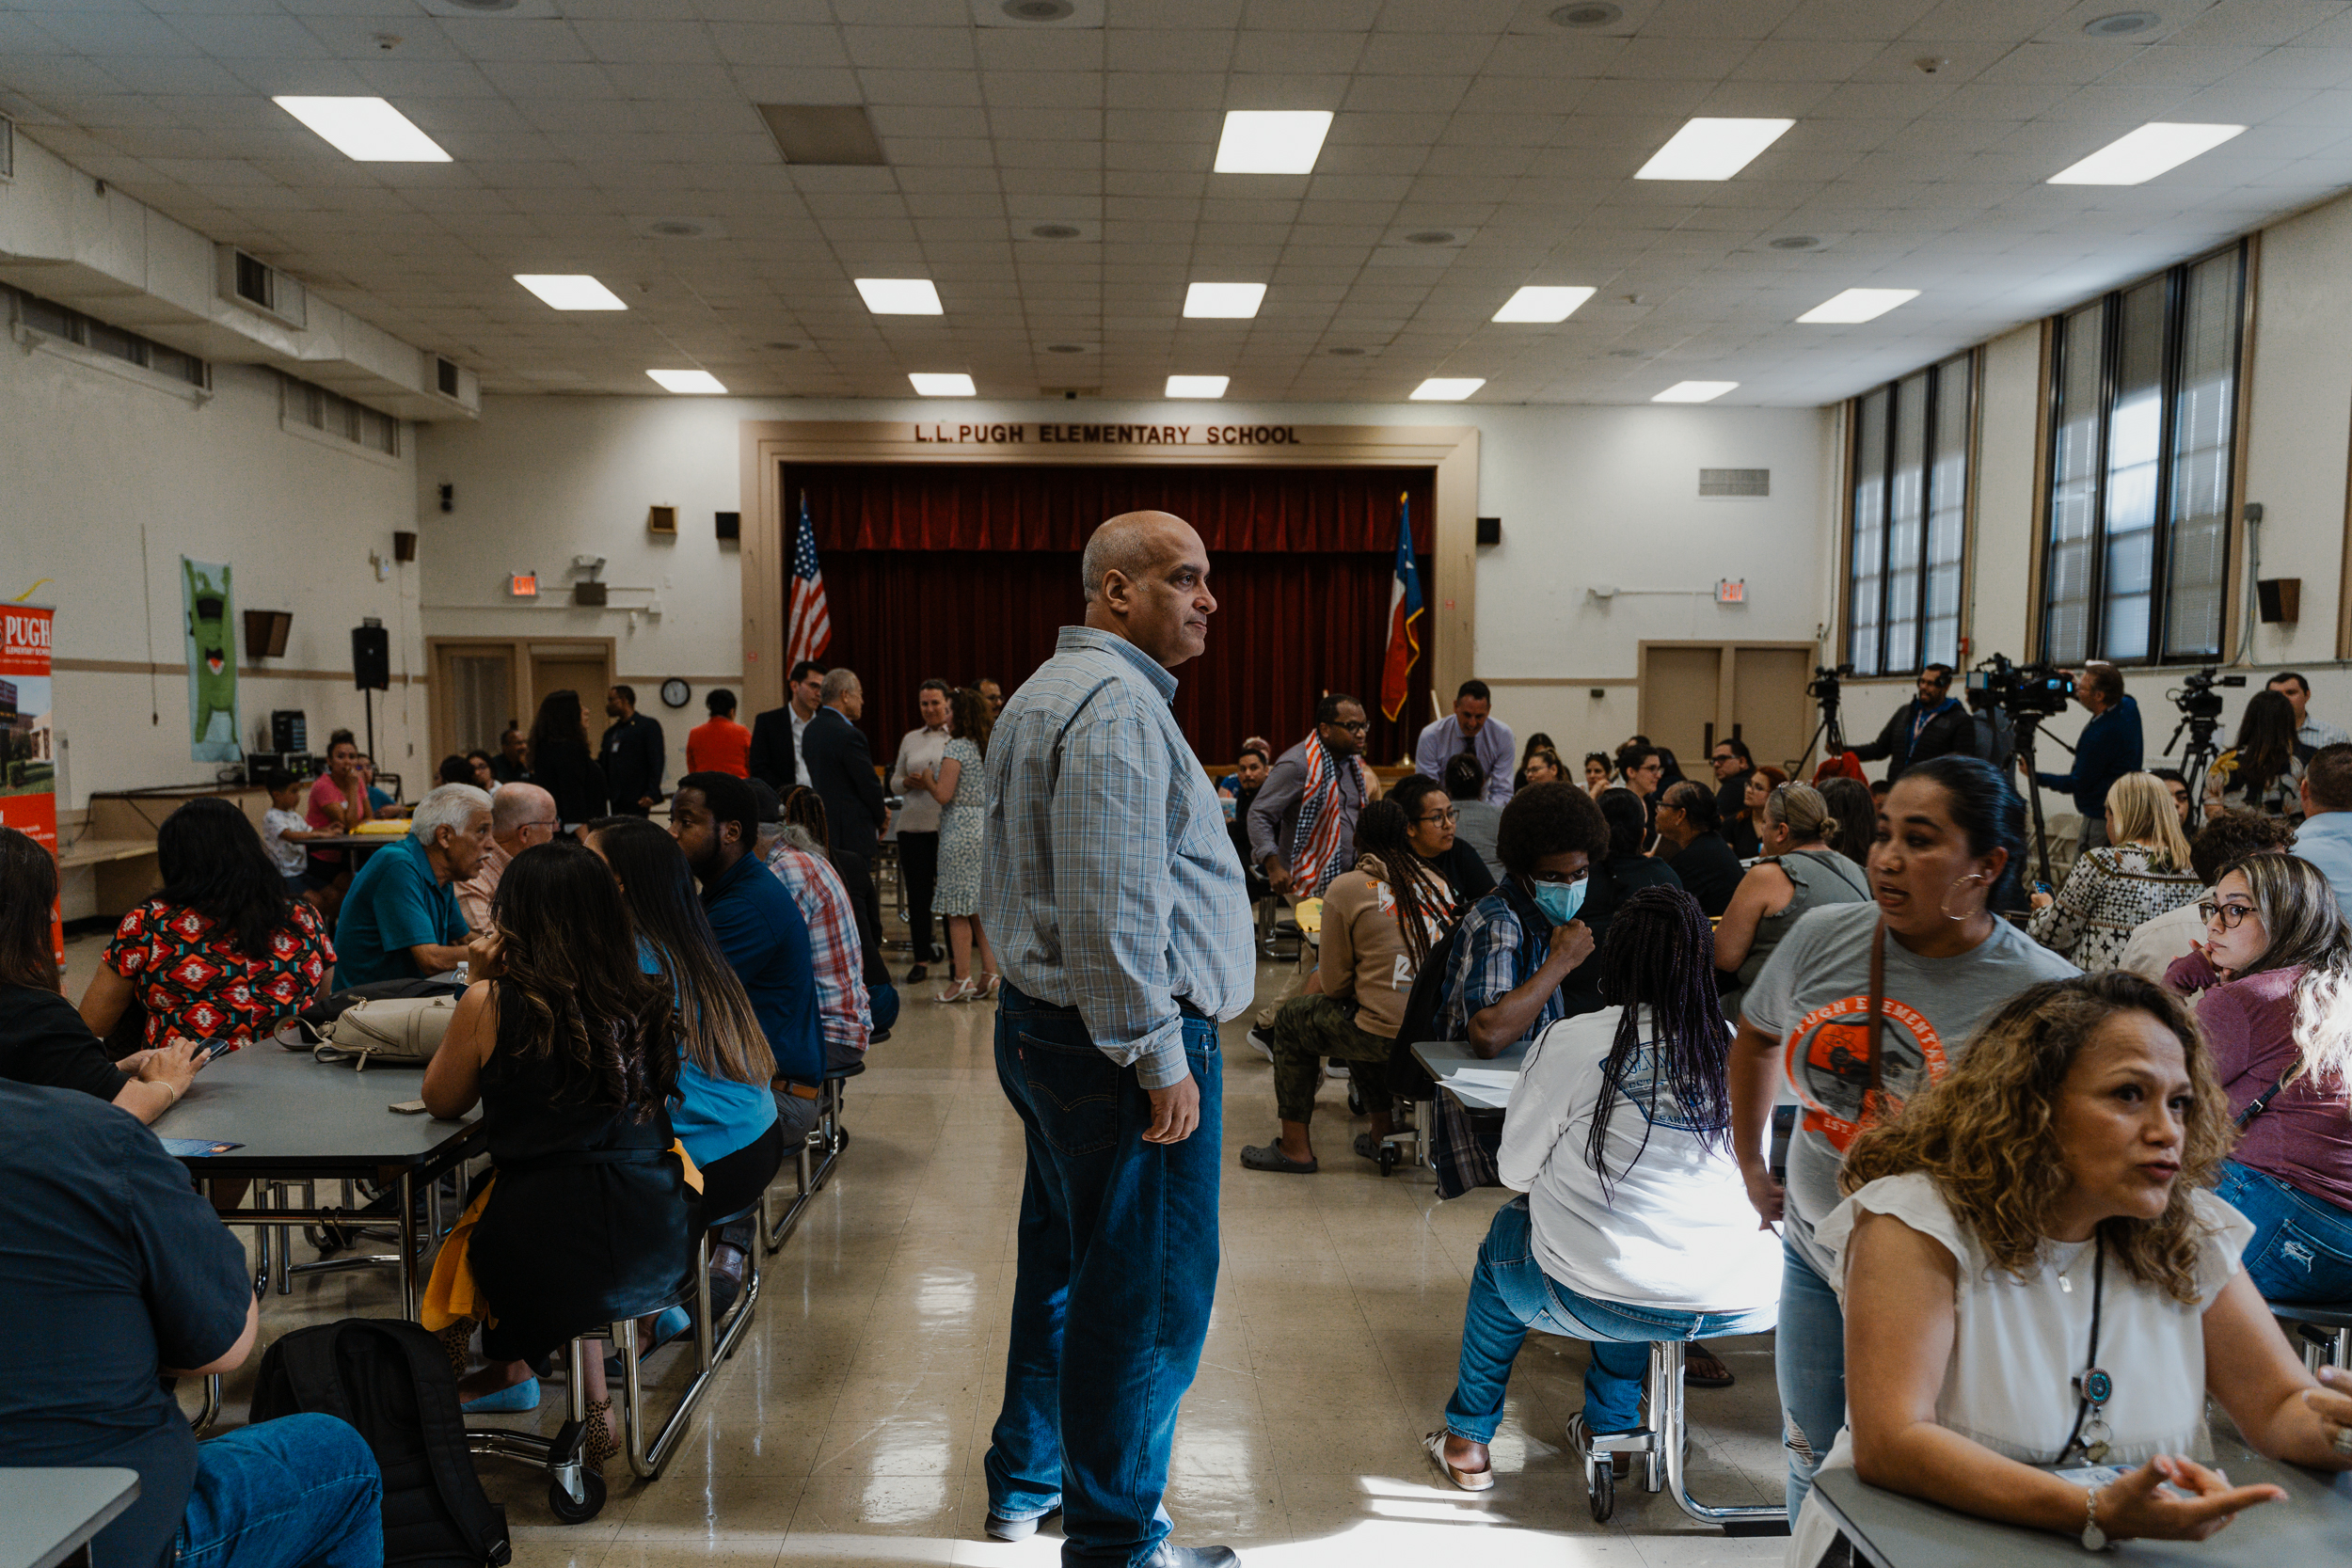 Attendees gather for a community meeting at Pugh Elementary to present questions and concerns to HISD Superintendent Mike Miles on Tuesday in Houston.